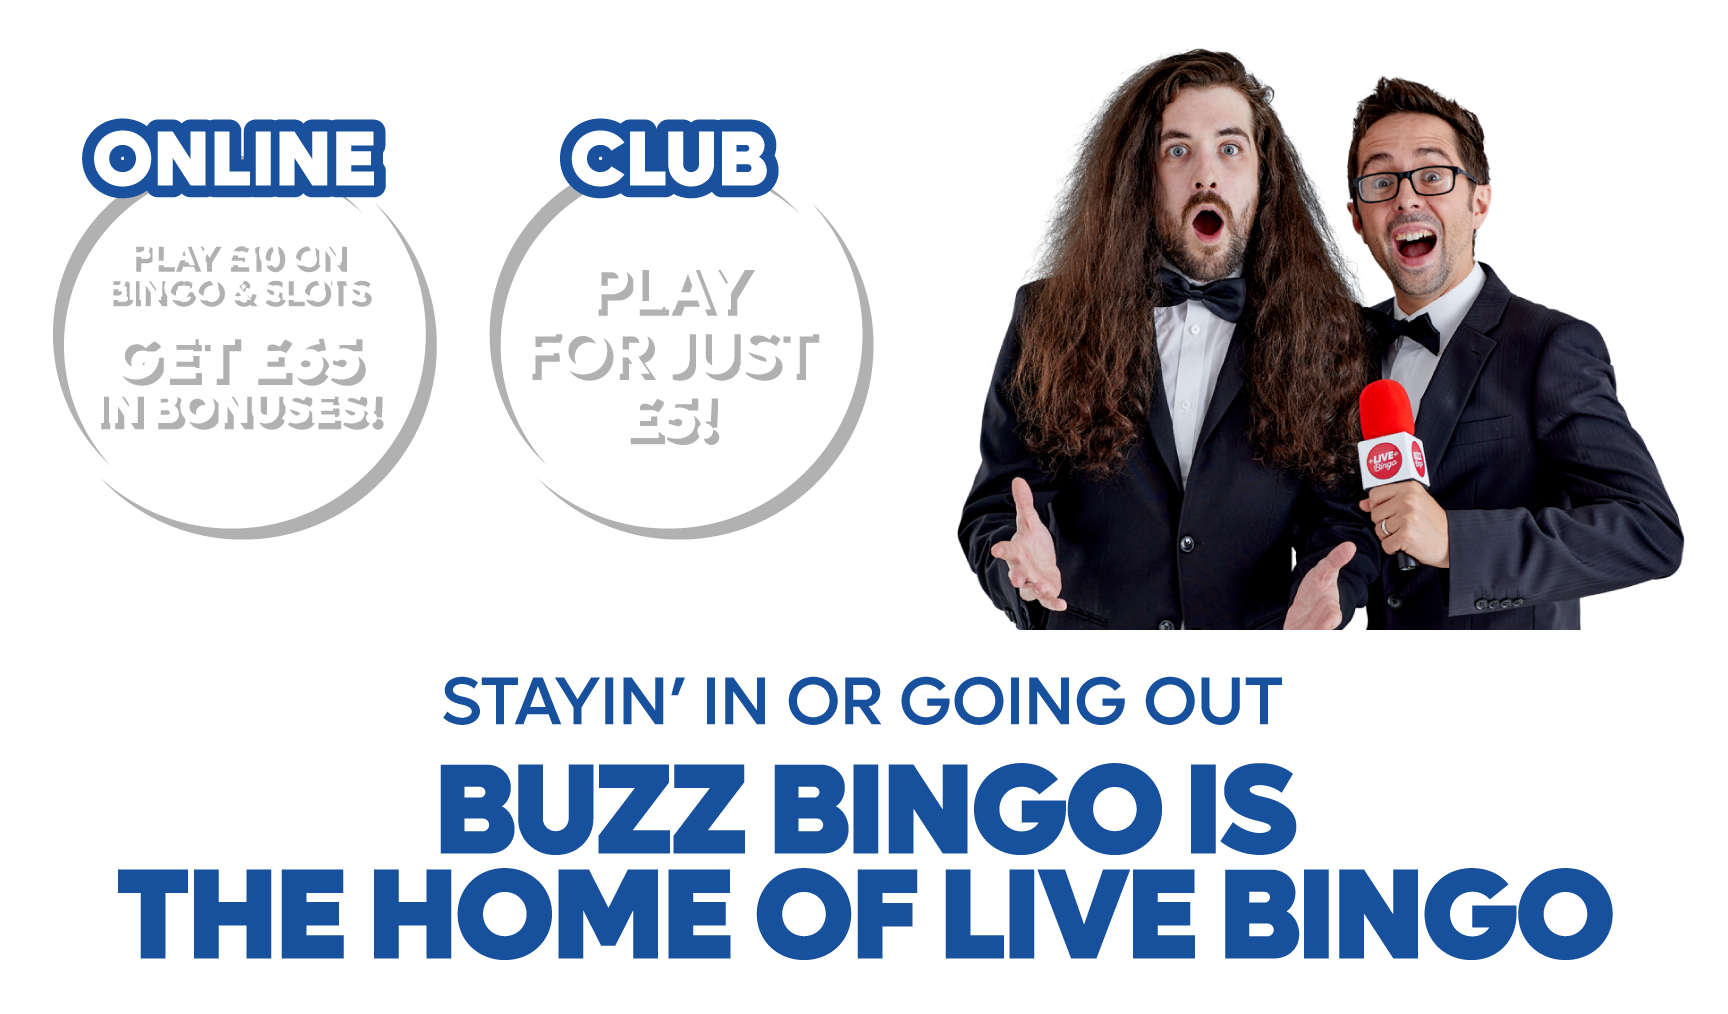 Stayin in or going out, Buzz Bingo is THE HOME OF LIVE BINGO • retail: Play
			for Just £5! • online - PLAY £10 ON BINGO & SLOTS, GET £65 IN BONUSES!